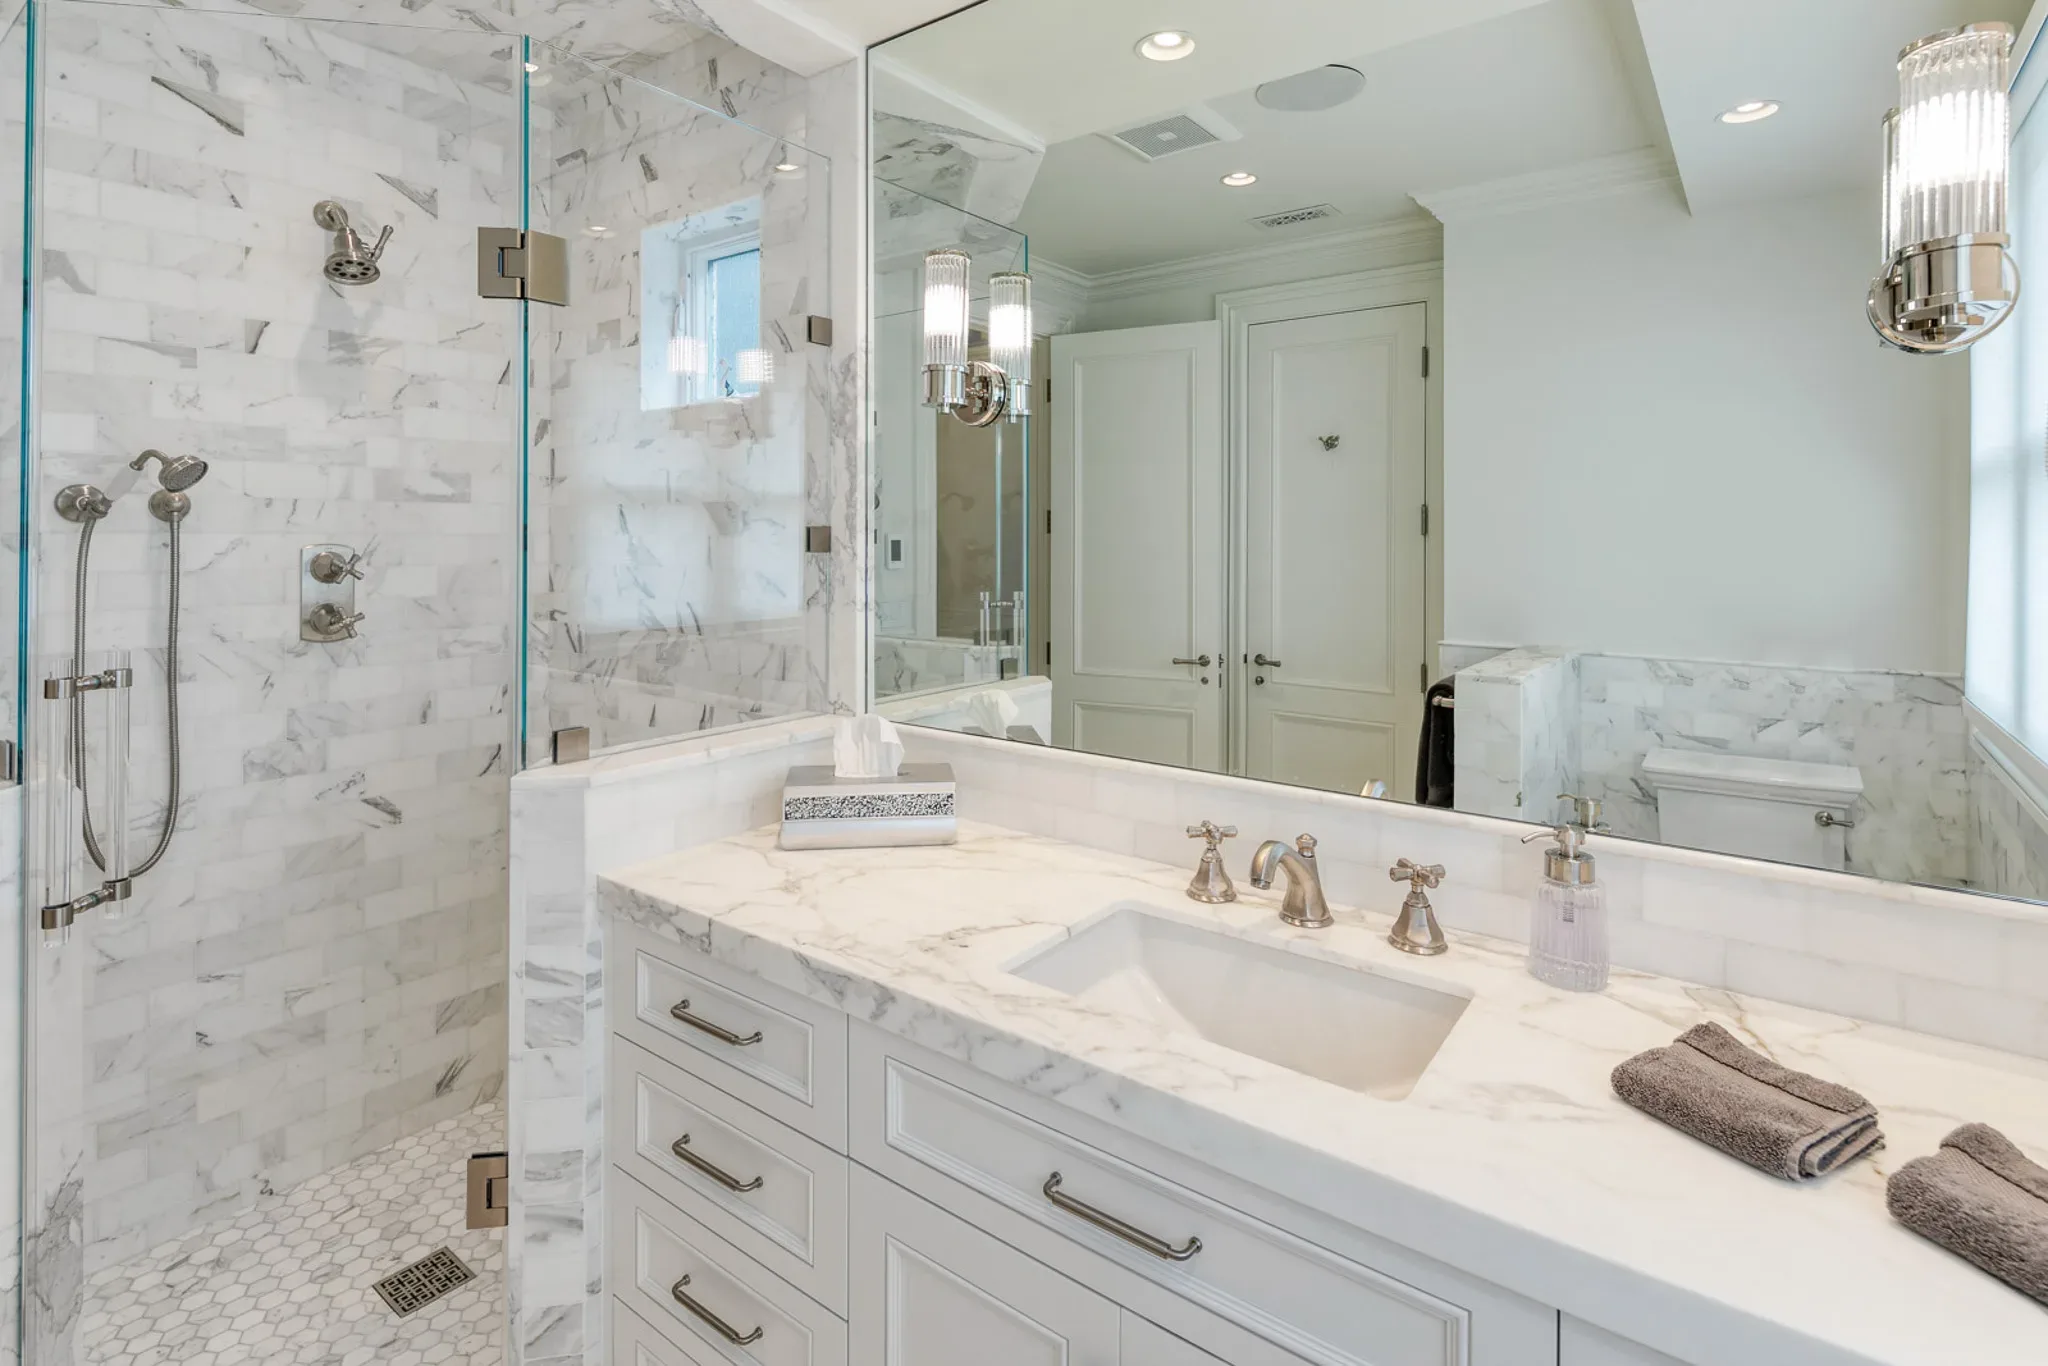 A white bathroom with marble counter tops and a walk in shower.